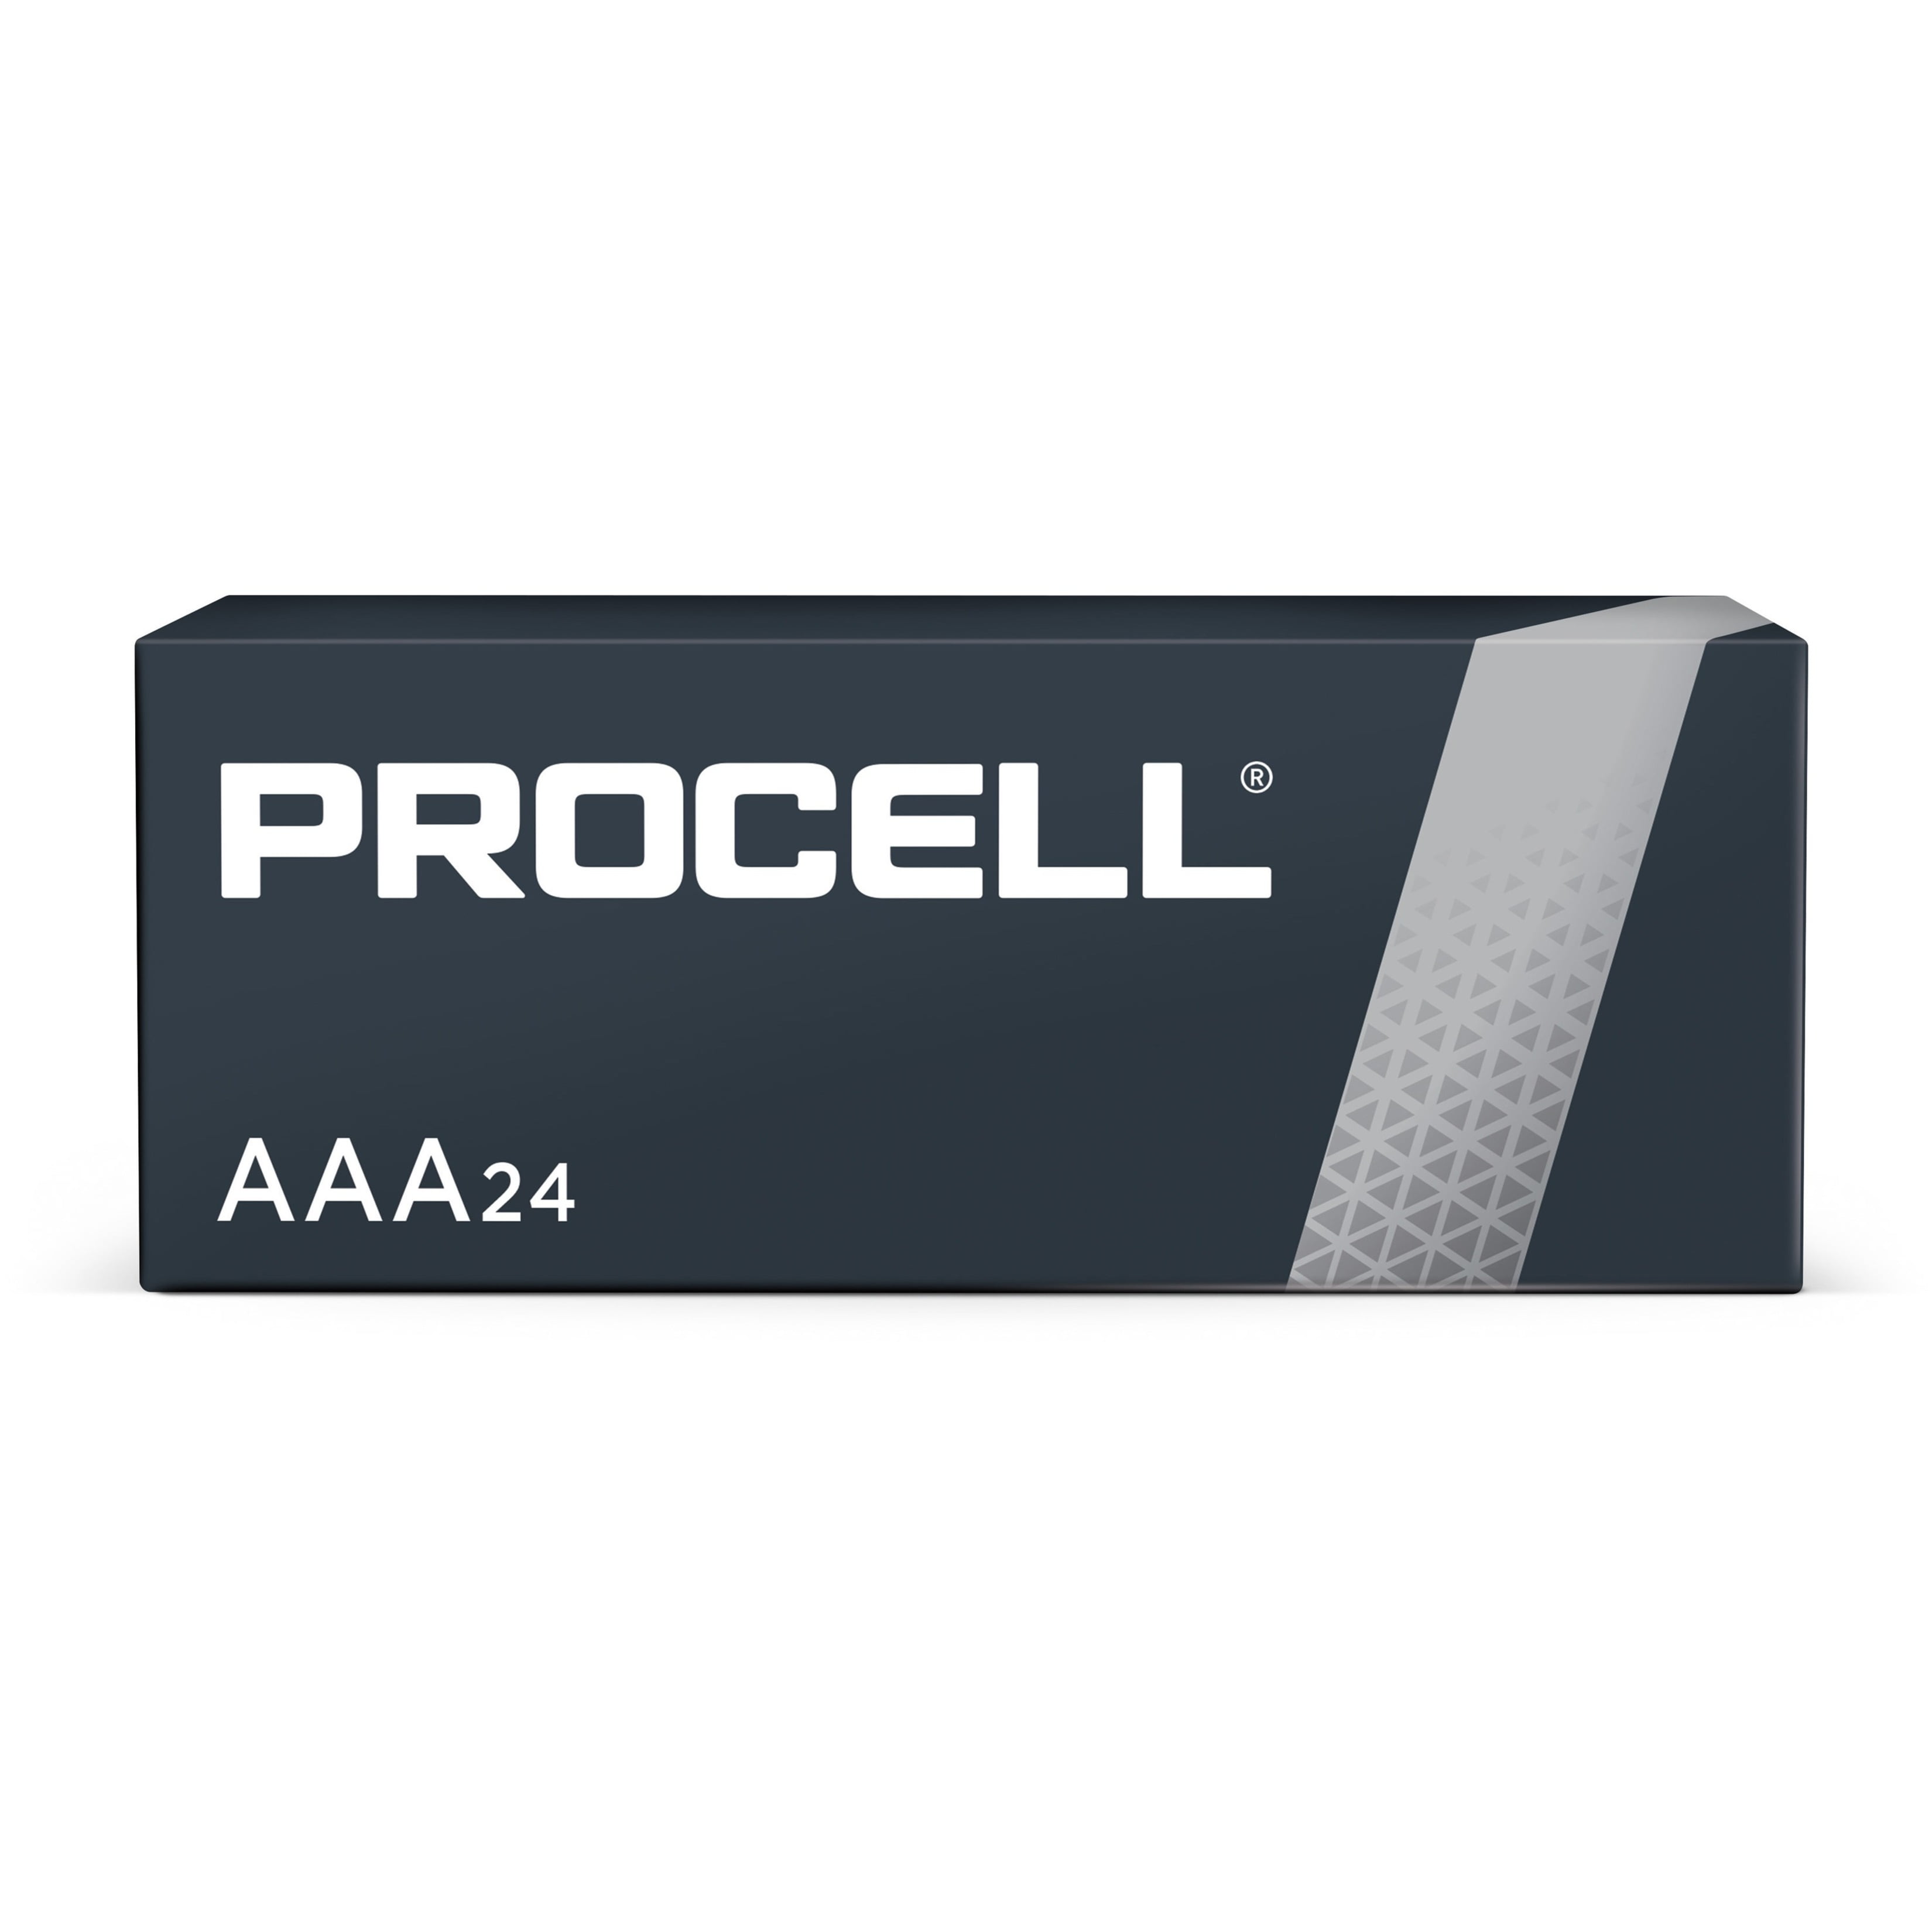 DURACELL PROCELL AAA BATTERY, 4-PACK - MBA USA, Inc.